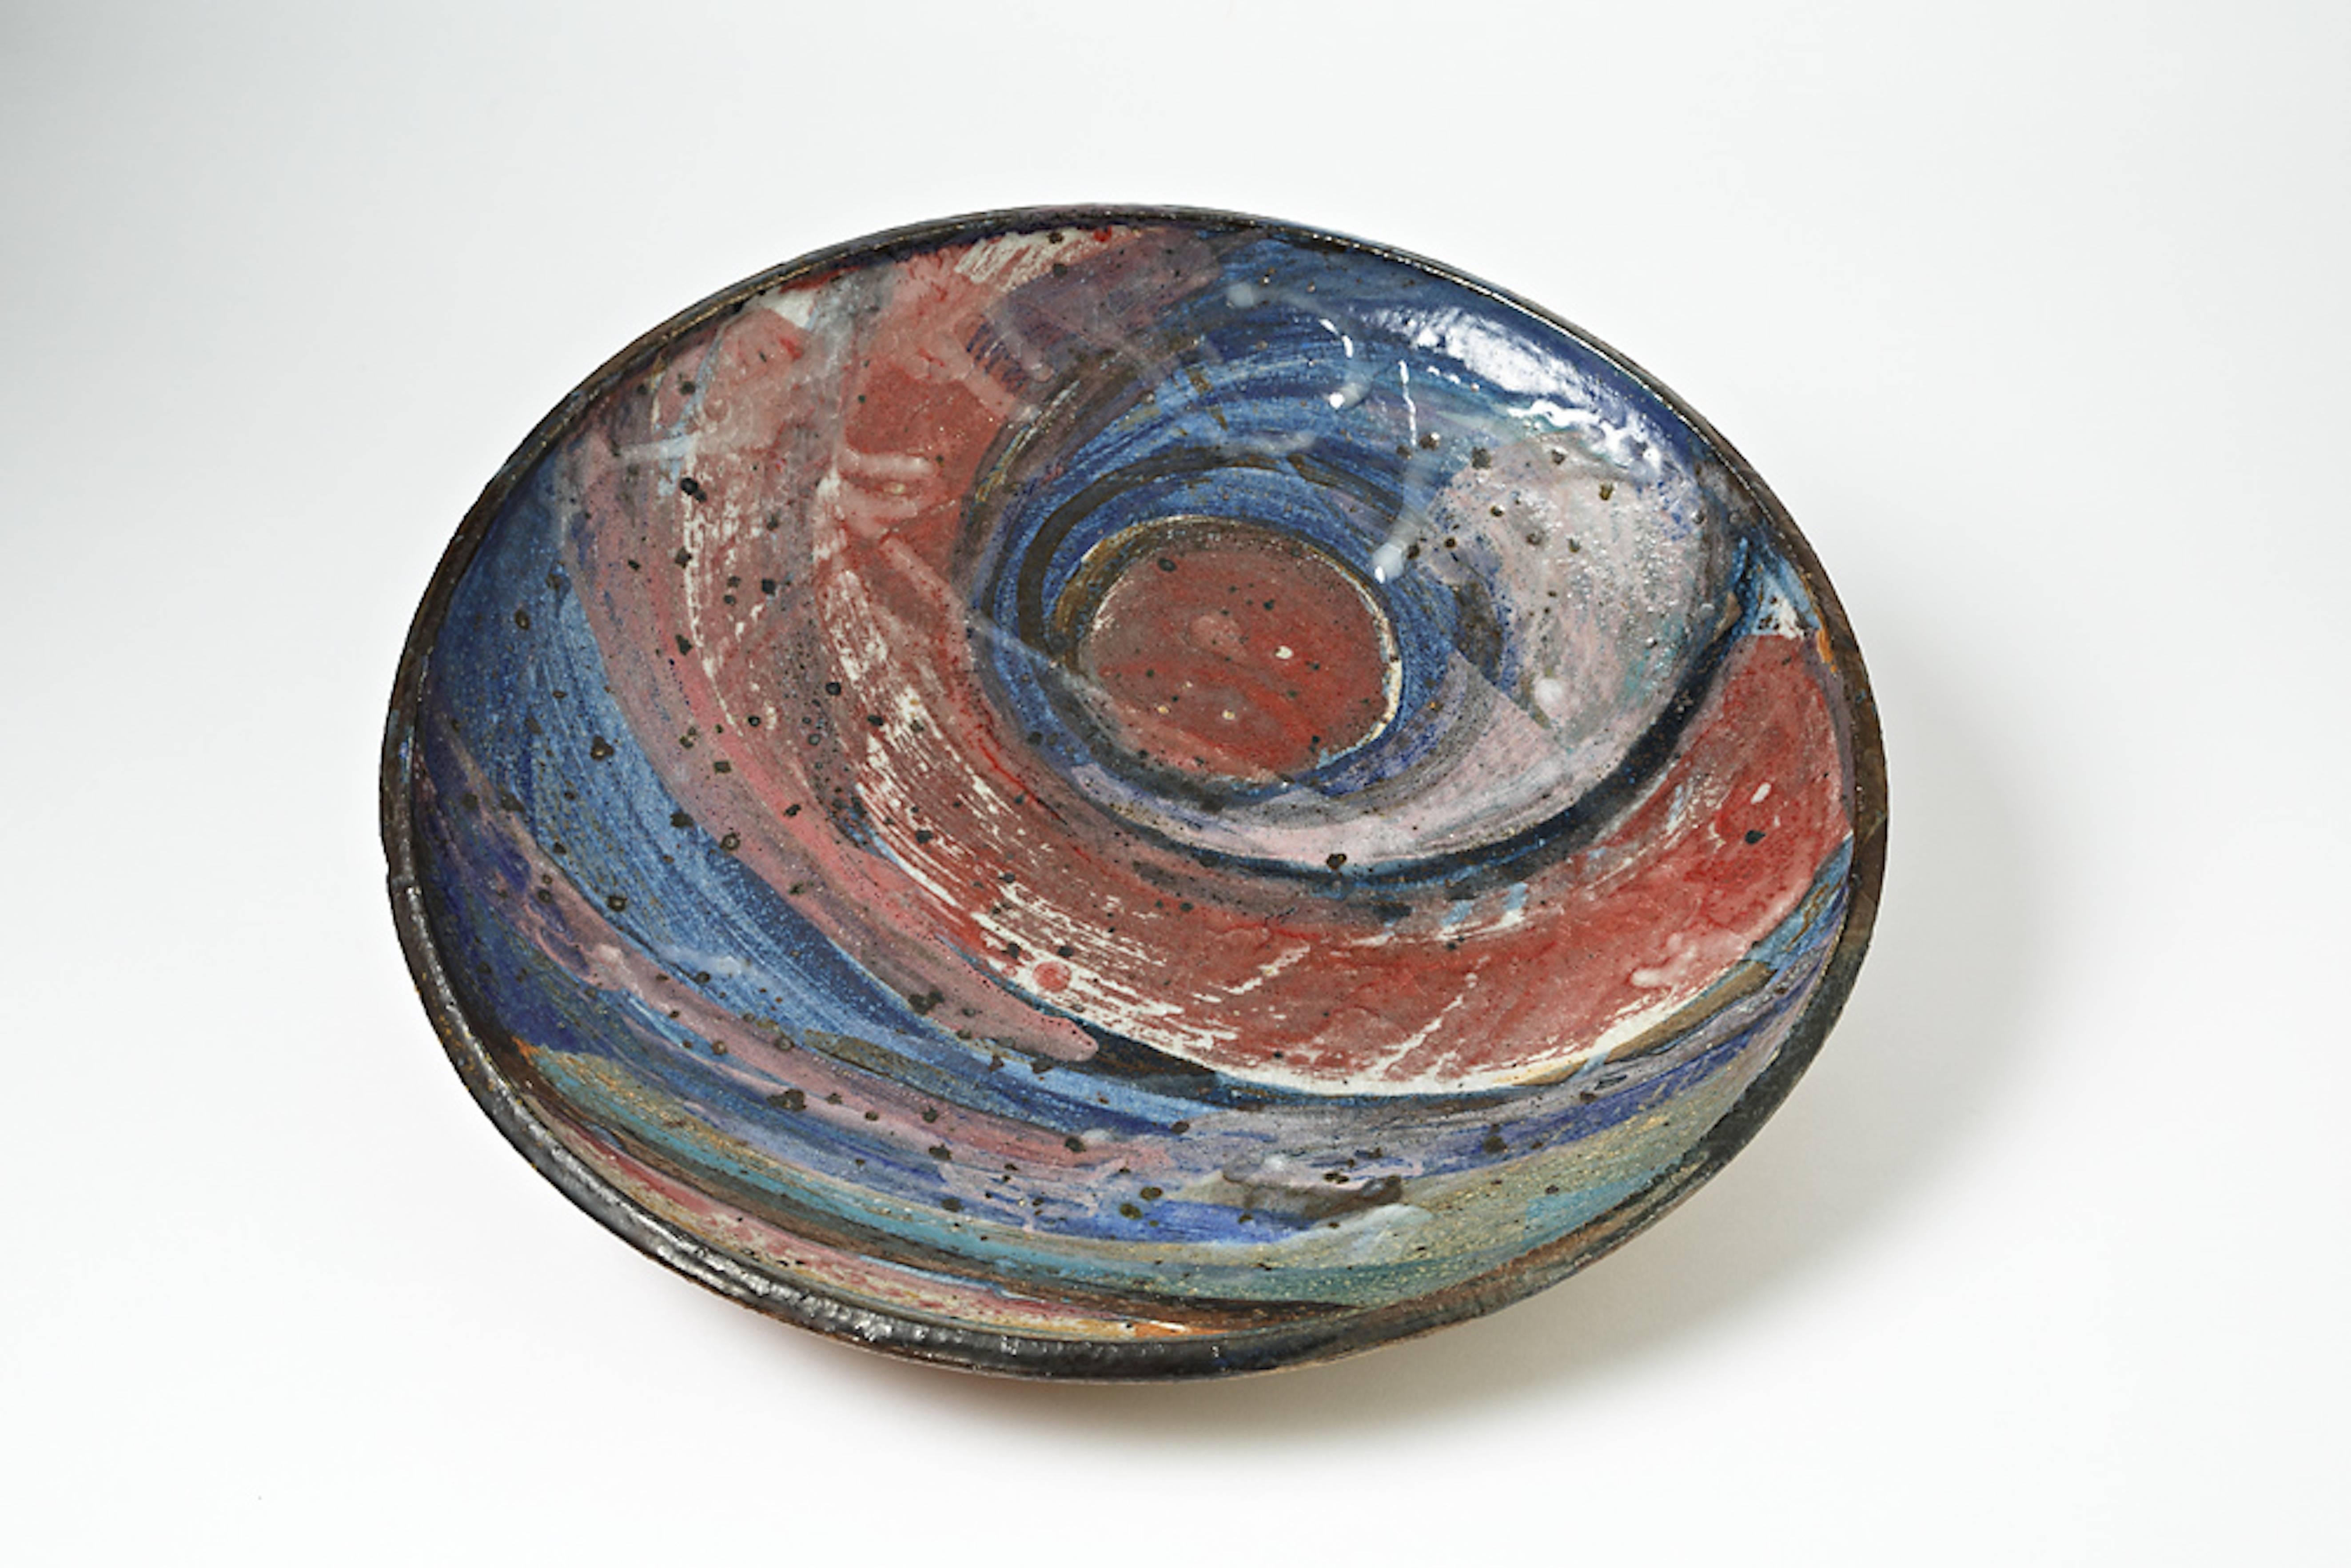 An important ceramic plate by Alain Gaudebert.
Perfect original conditions.
Signed under the base 